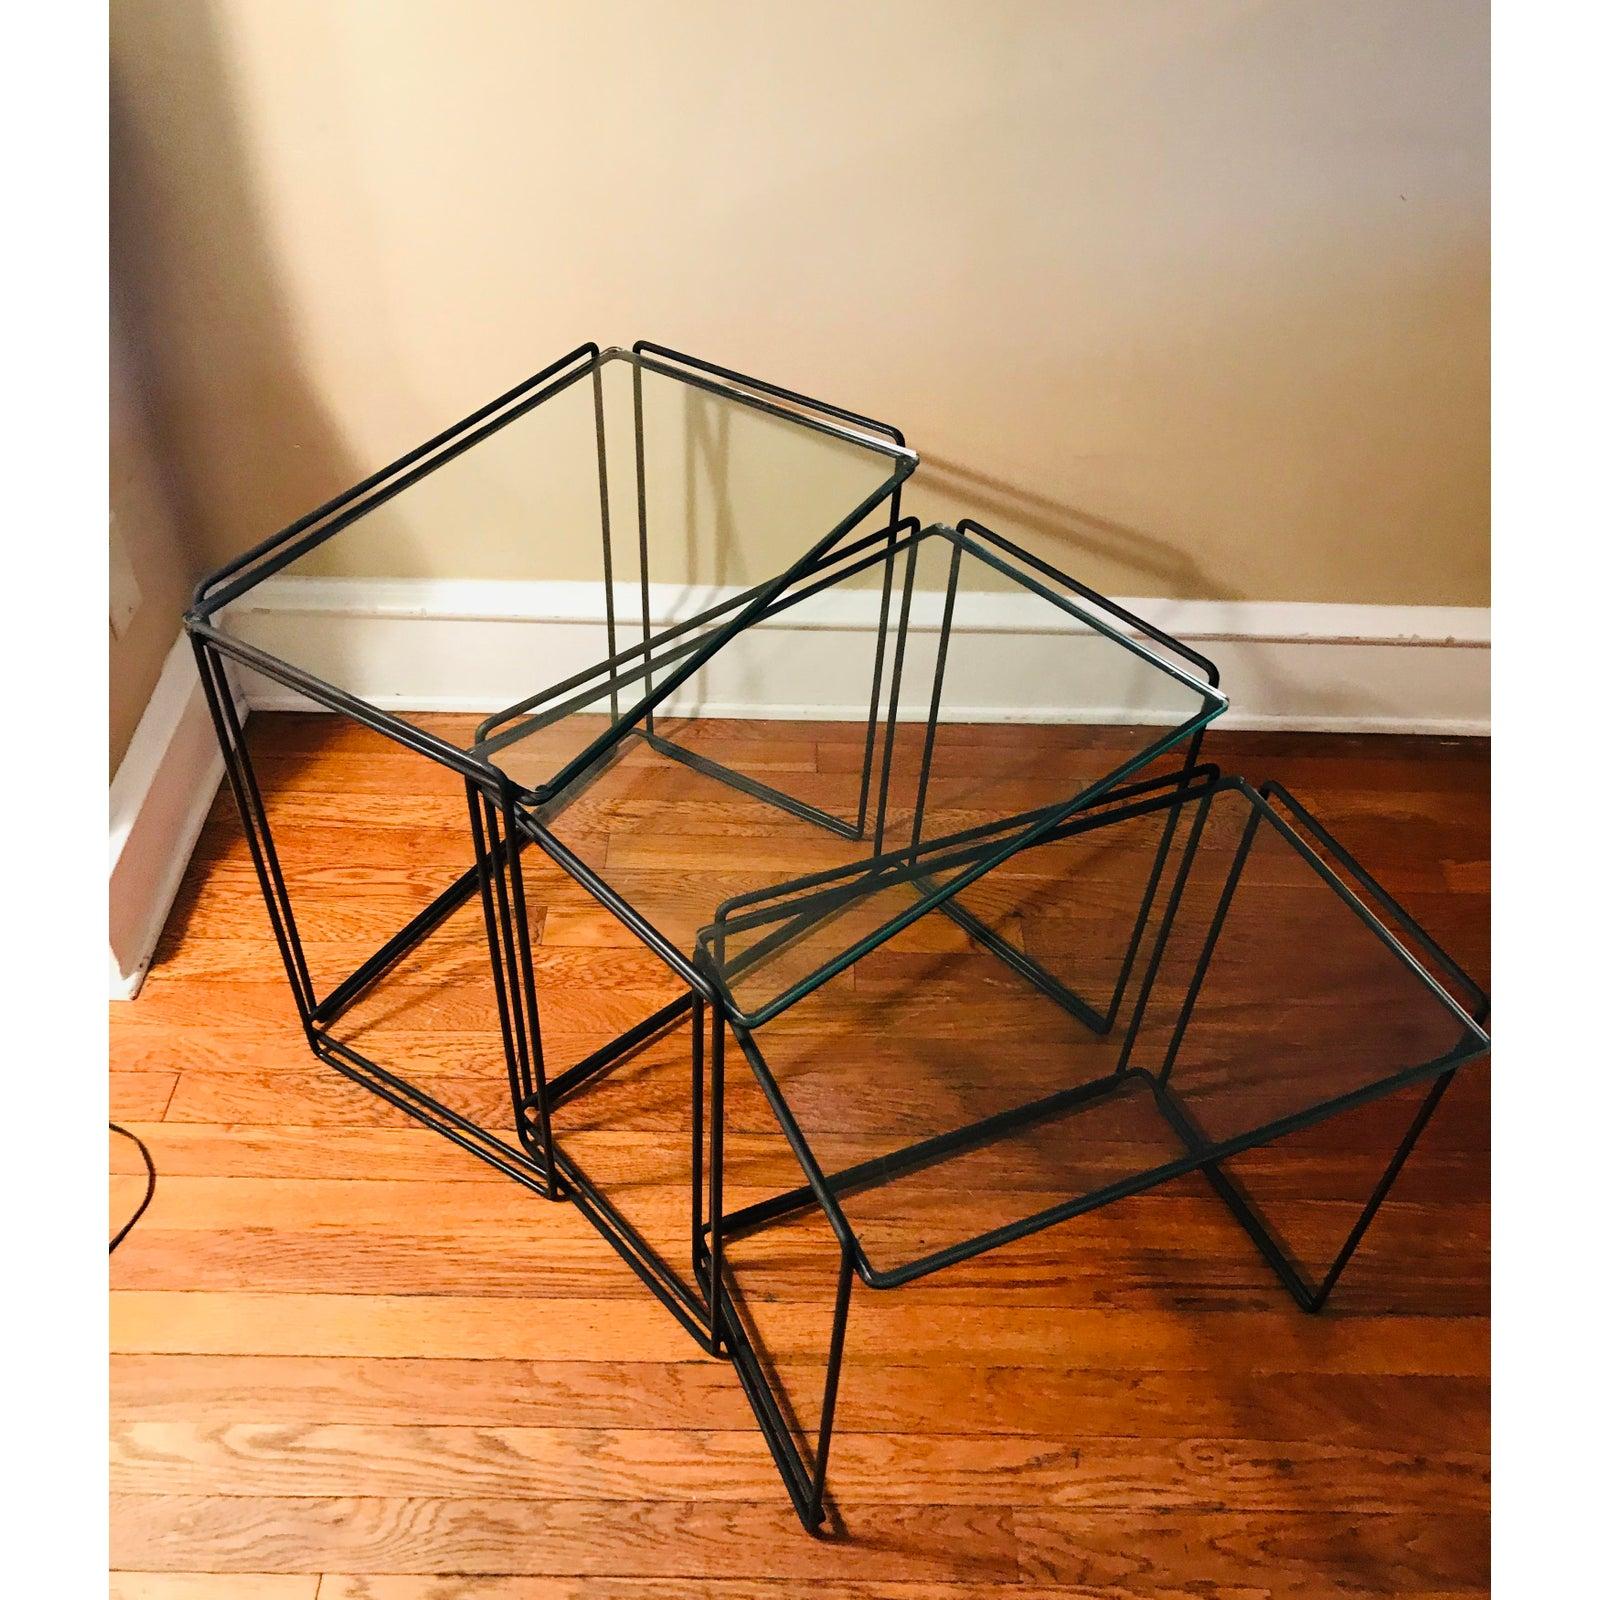 Set of Minimalist nesting tables designed by French designer Max Sauze. 

Manufactured for Attrow, circa 1960s. 

Simple design with welded black wrought iron and glass. 

I would say this is an early example of Post-modernism, despite being